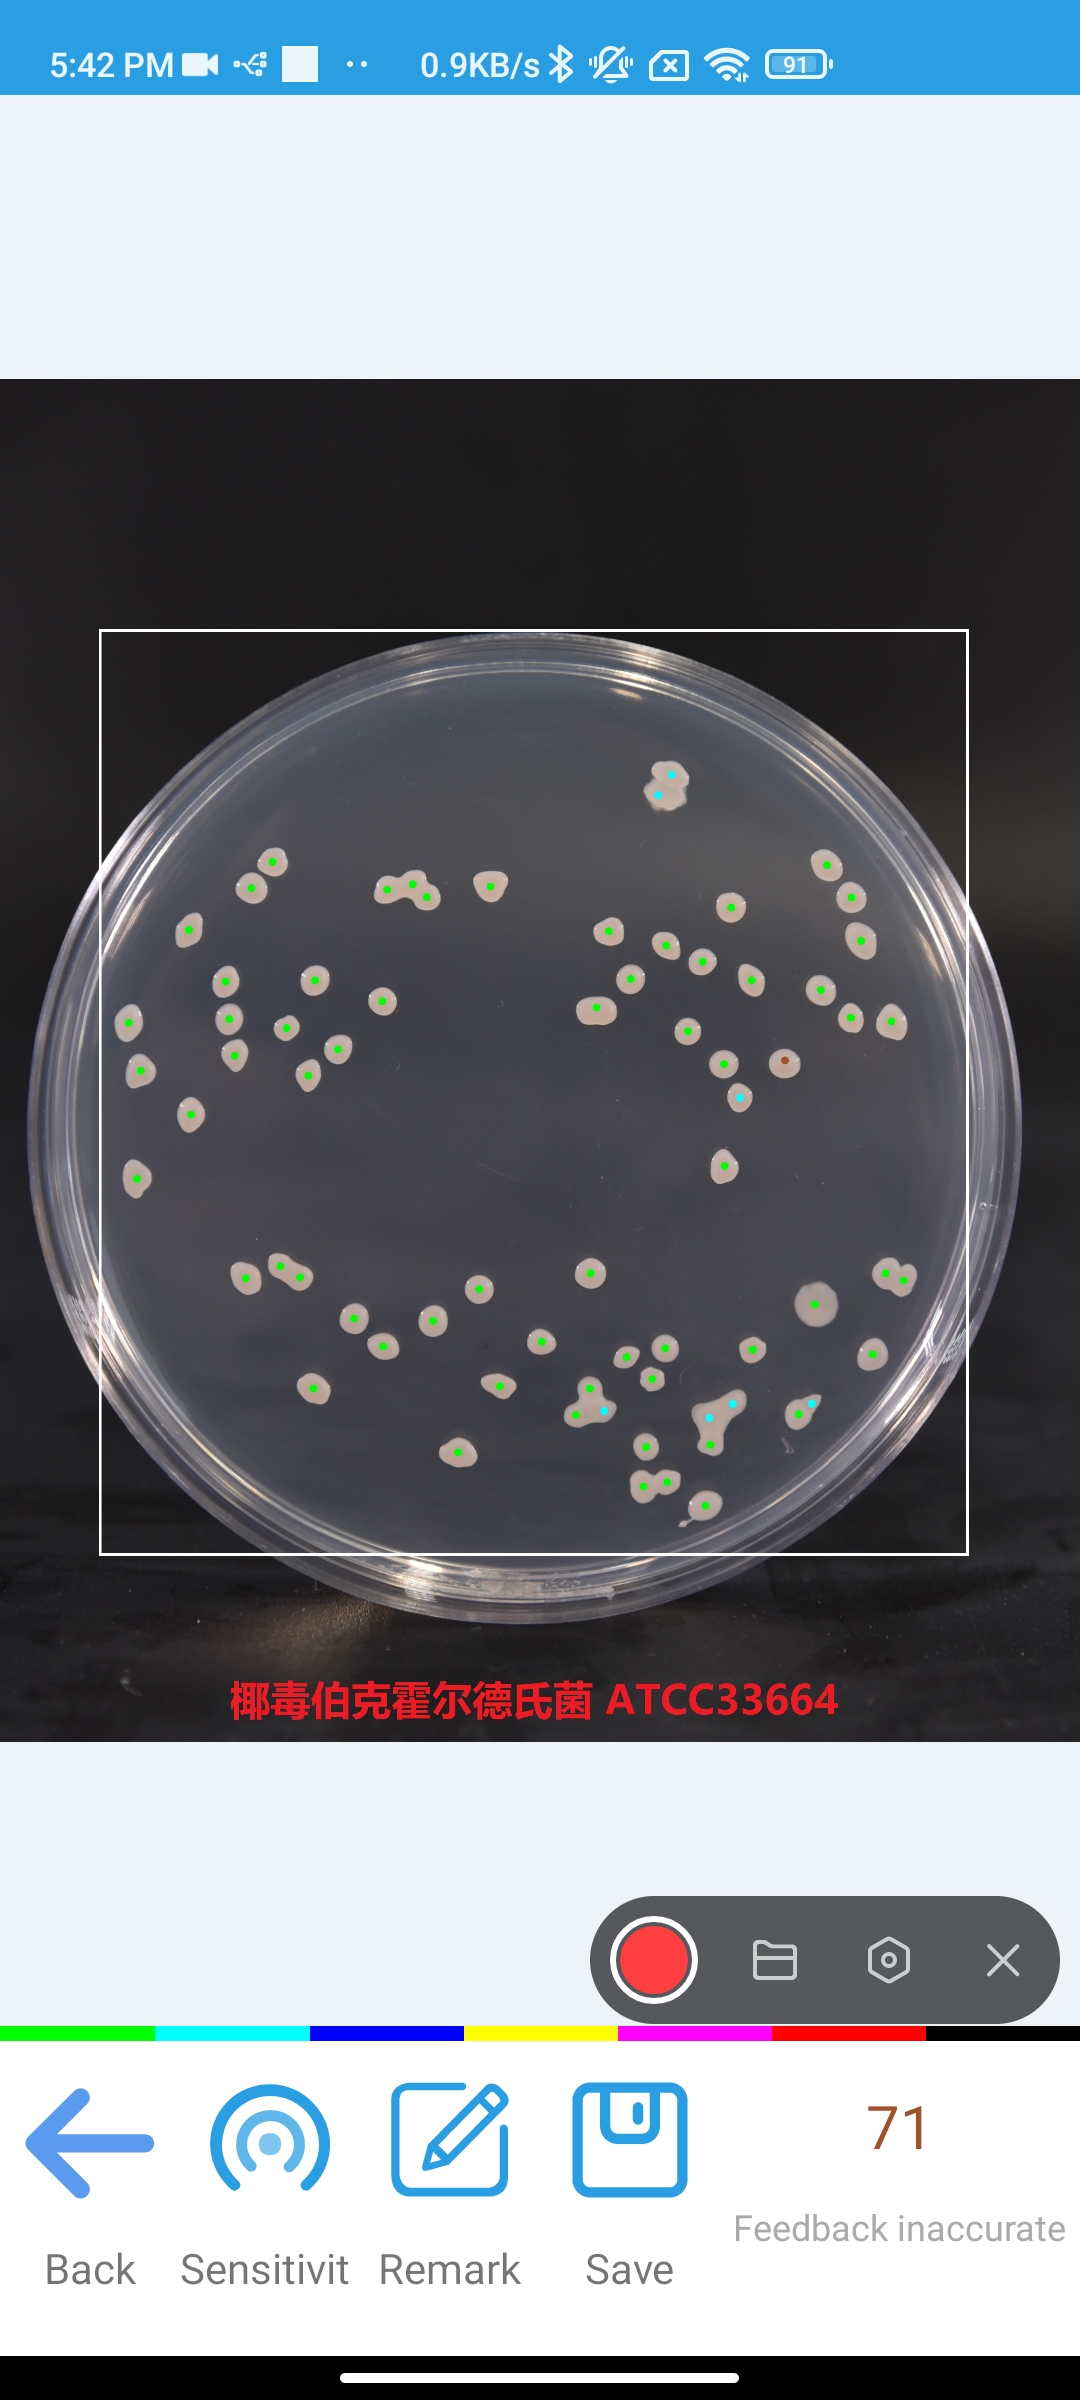 Automatically count bacterial colony forming unit